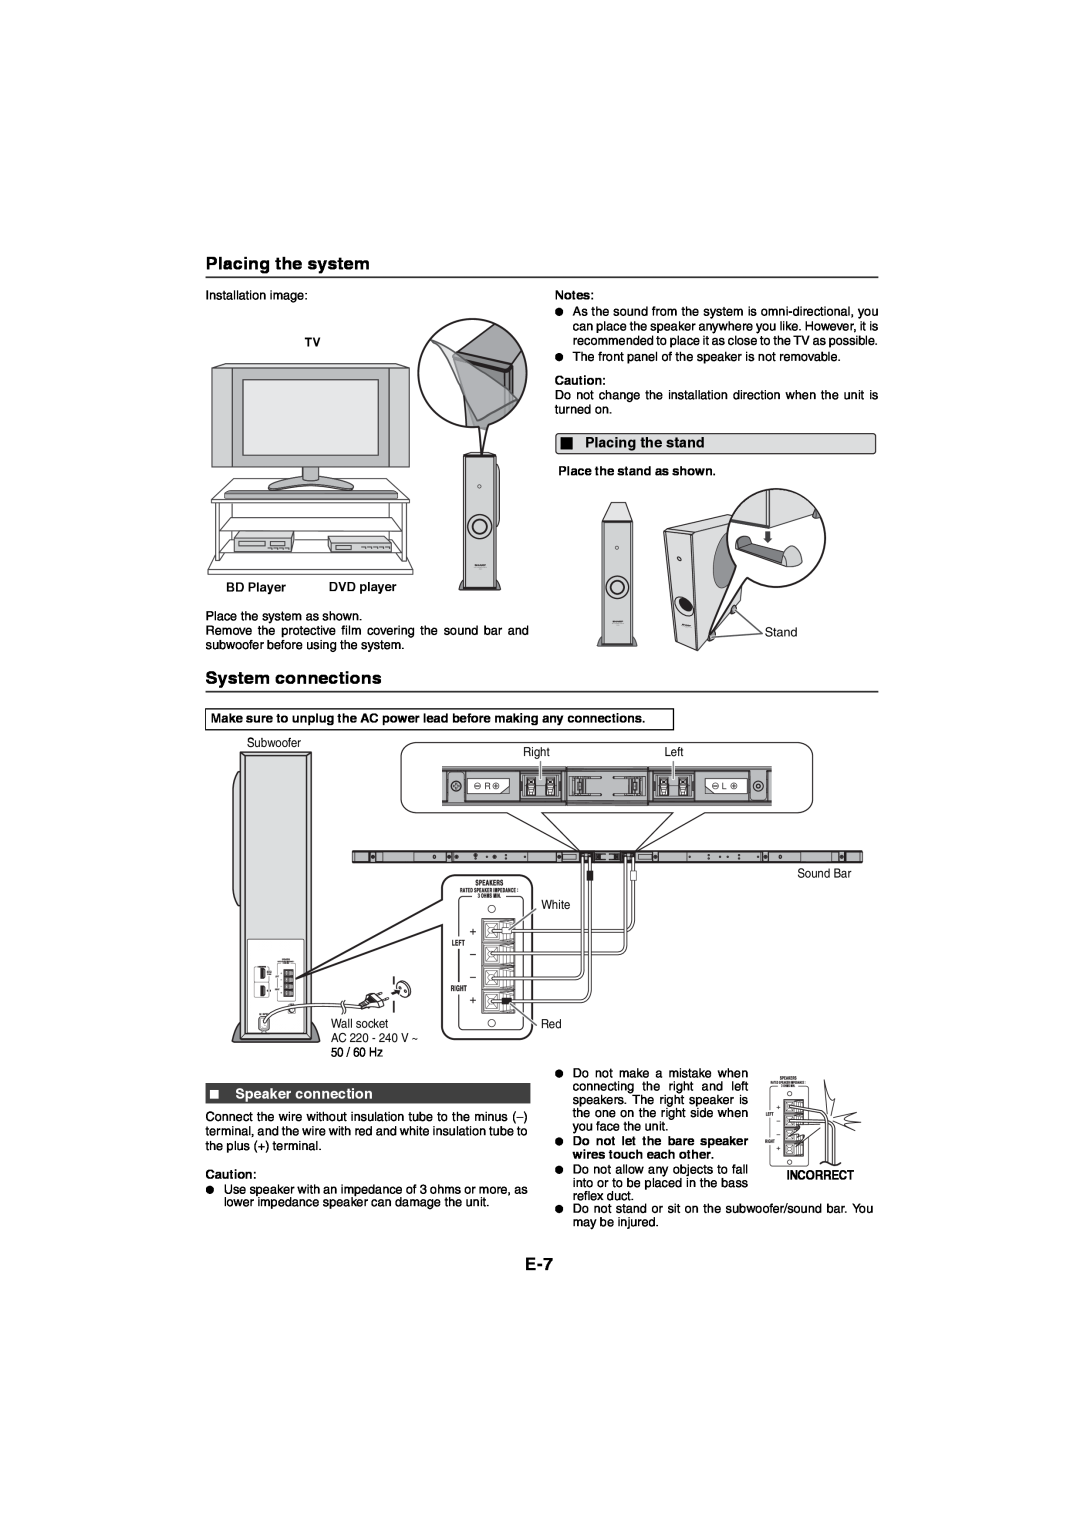 Sharp HT-SL75, HT-SL70 operation manual Placing the system, System connections, Placing the stand, Speaker connection 